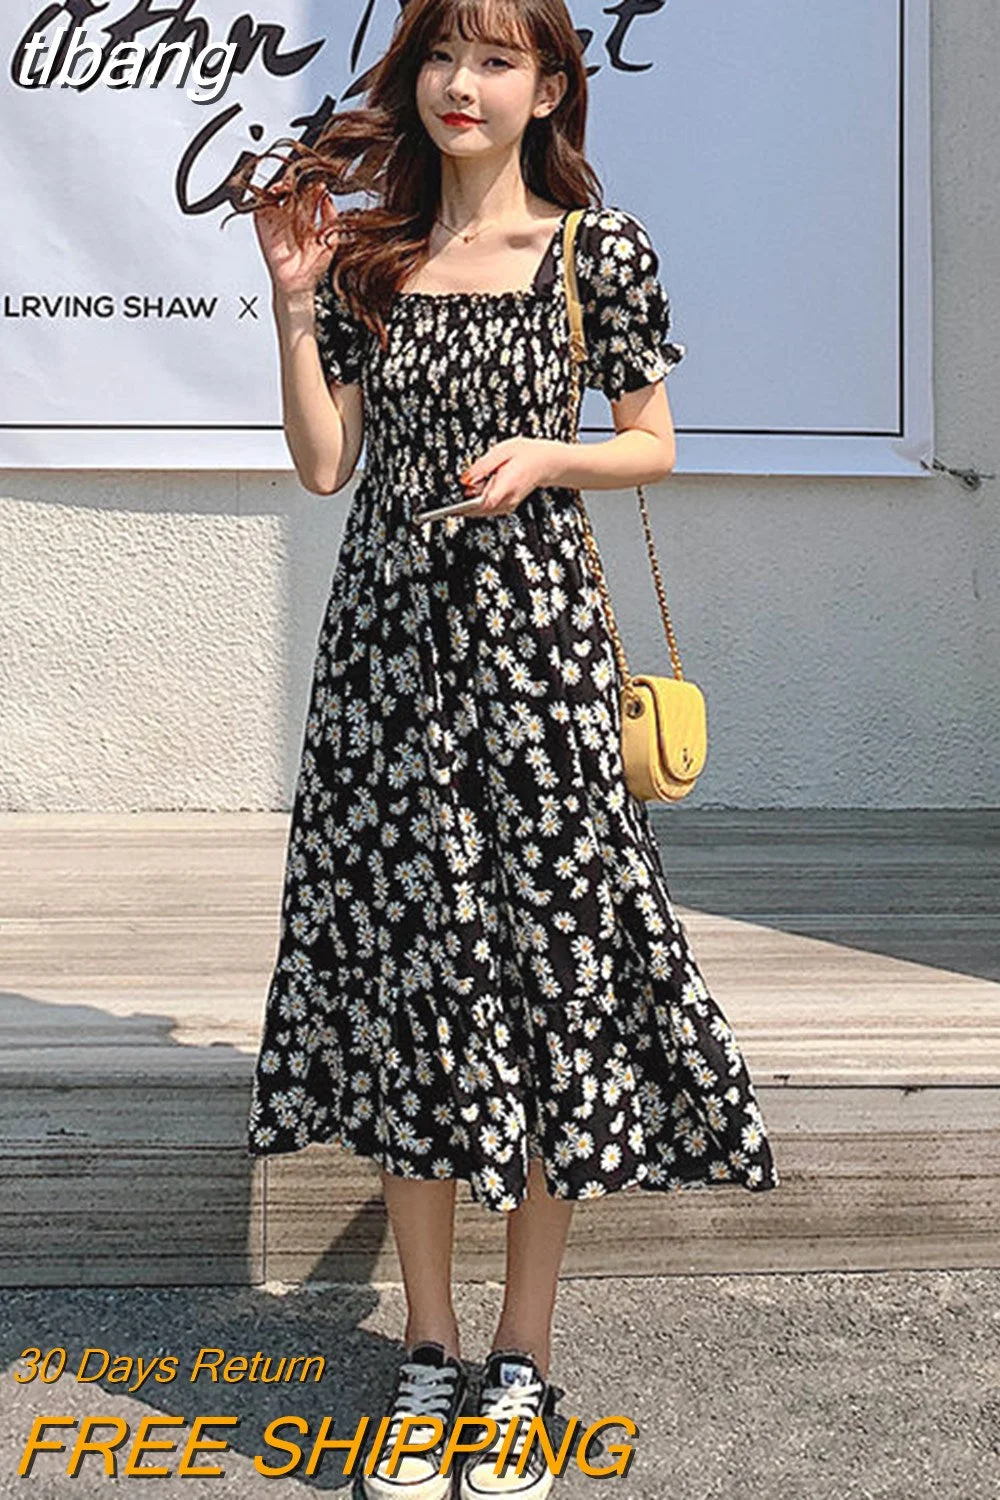 tlbang Women Daisy-printing Elegant Various Design Square Collar Sweet Lady All-match Leisure Holiday Sundress Korean Style Cozy